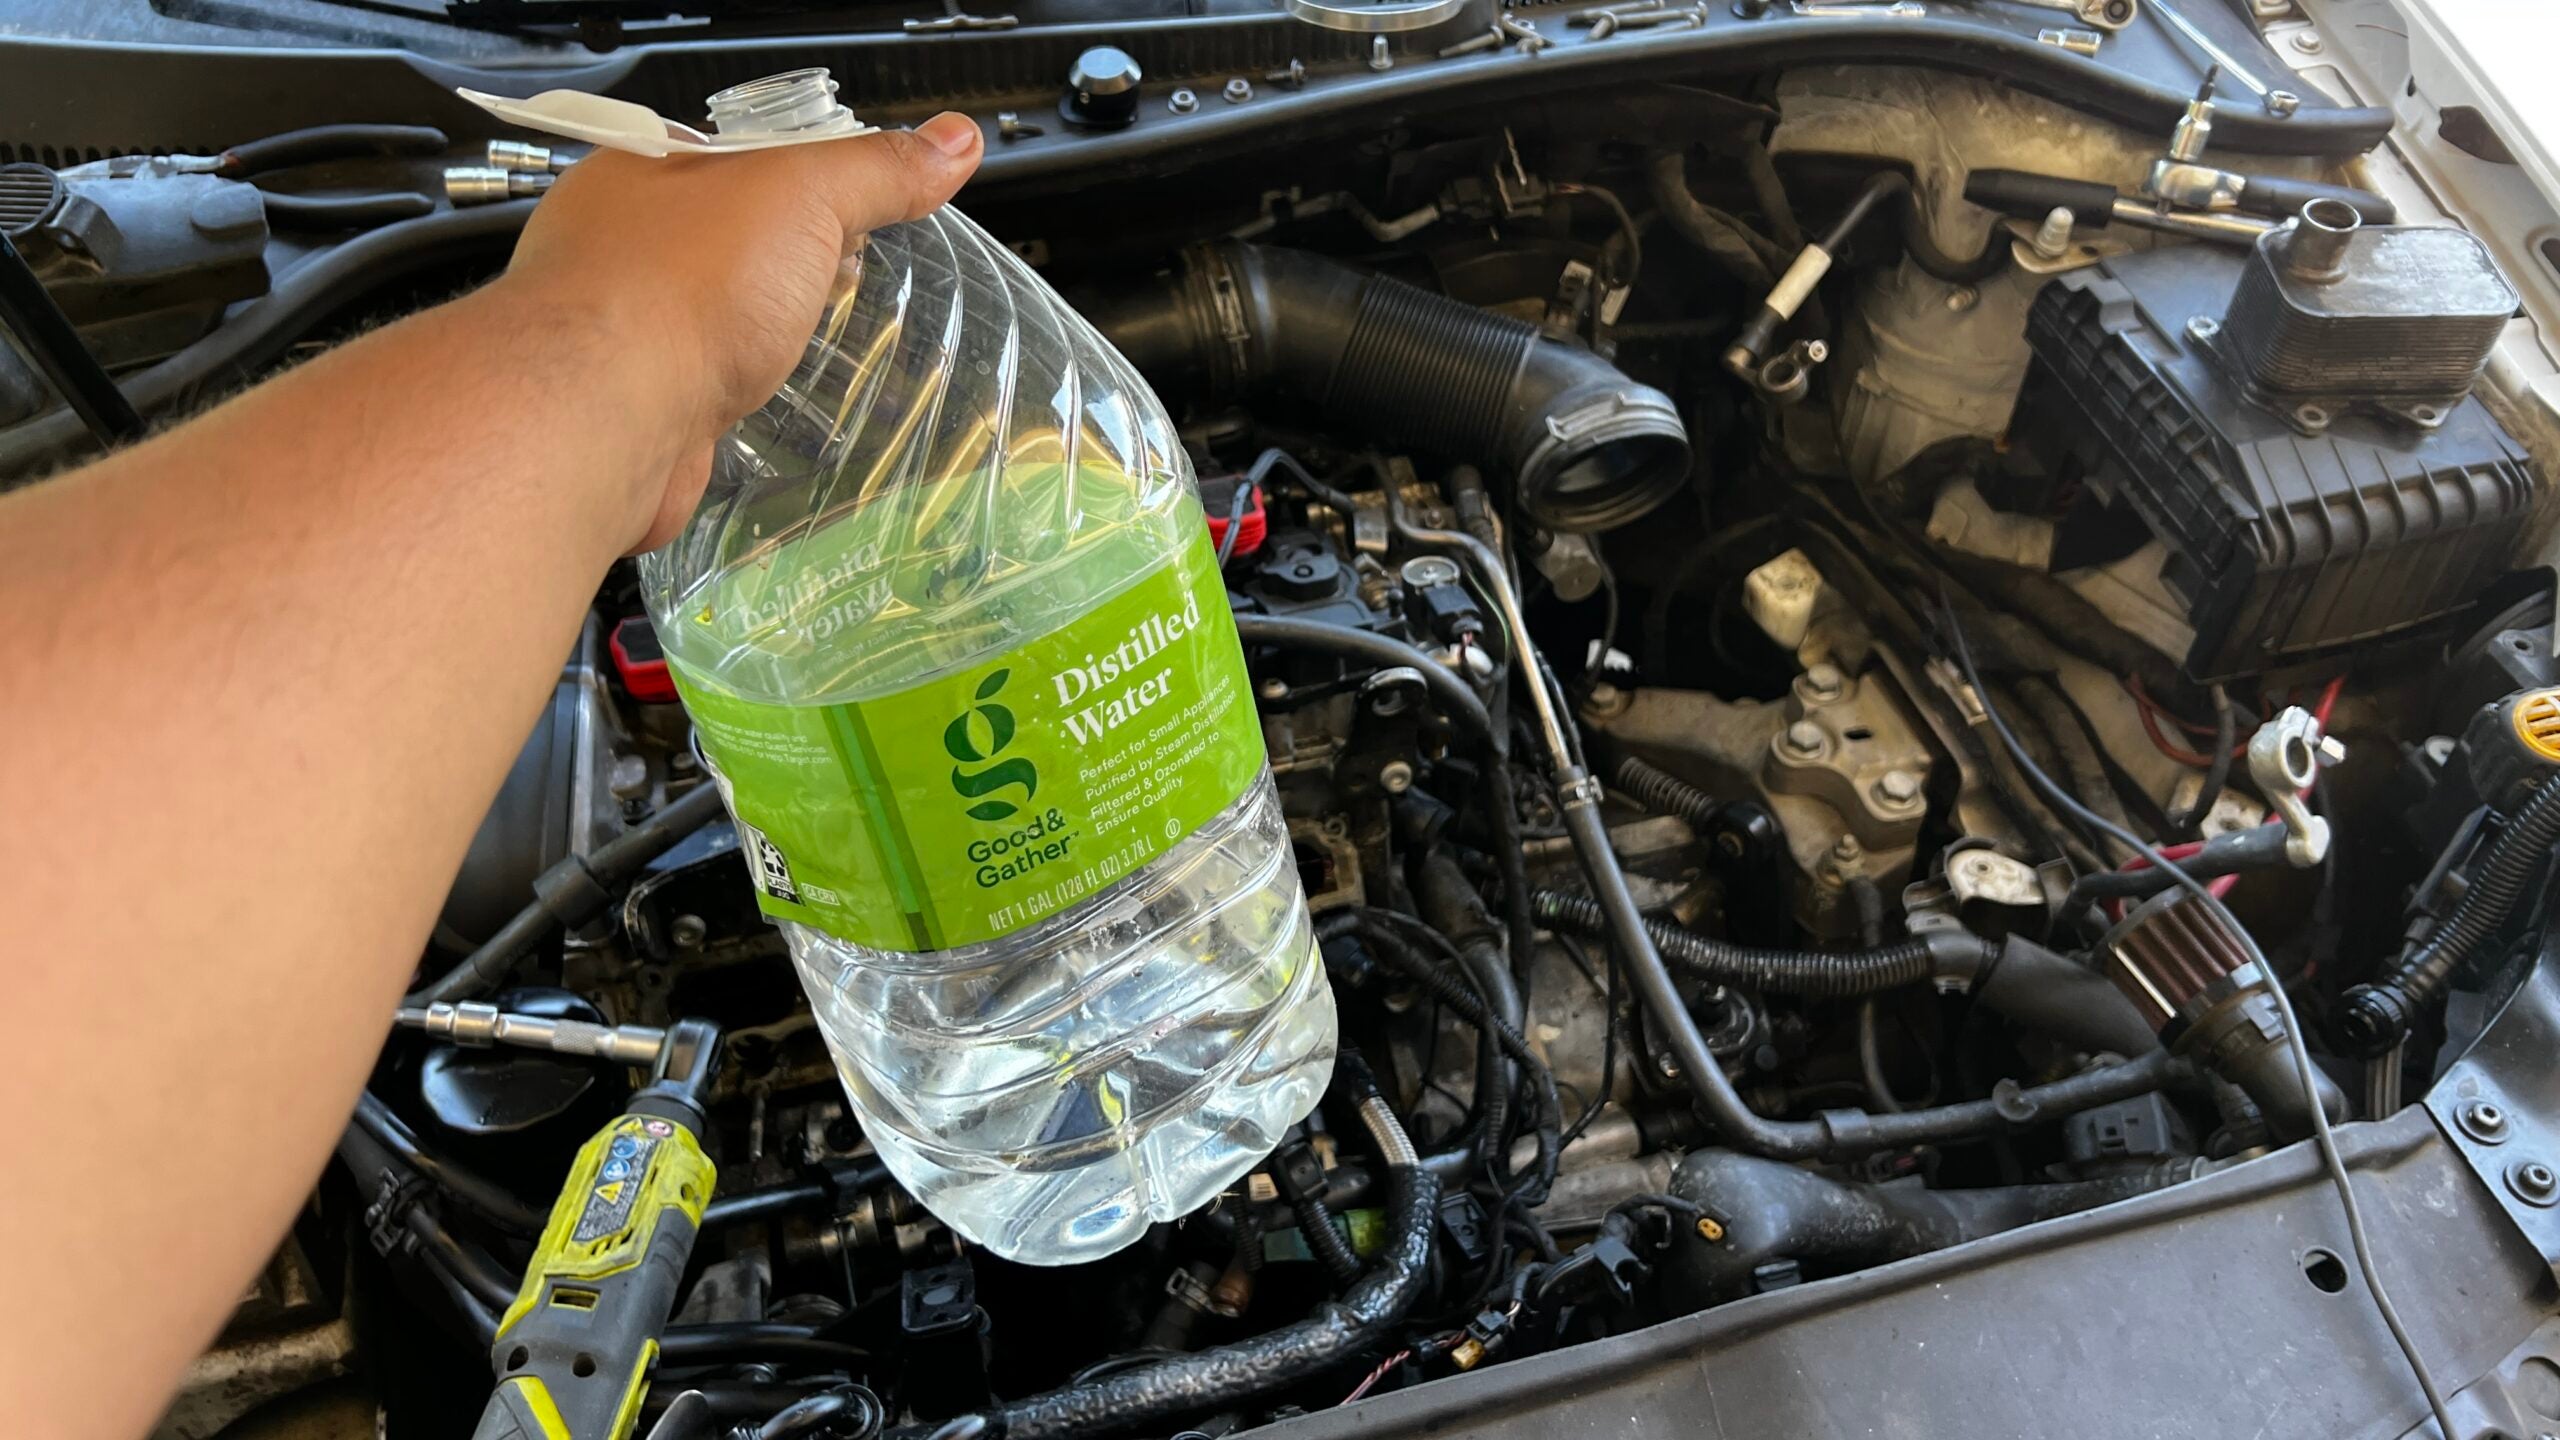 An image of a gallon of distilled water being held above an engine bay. The label on the water gallon is green.